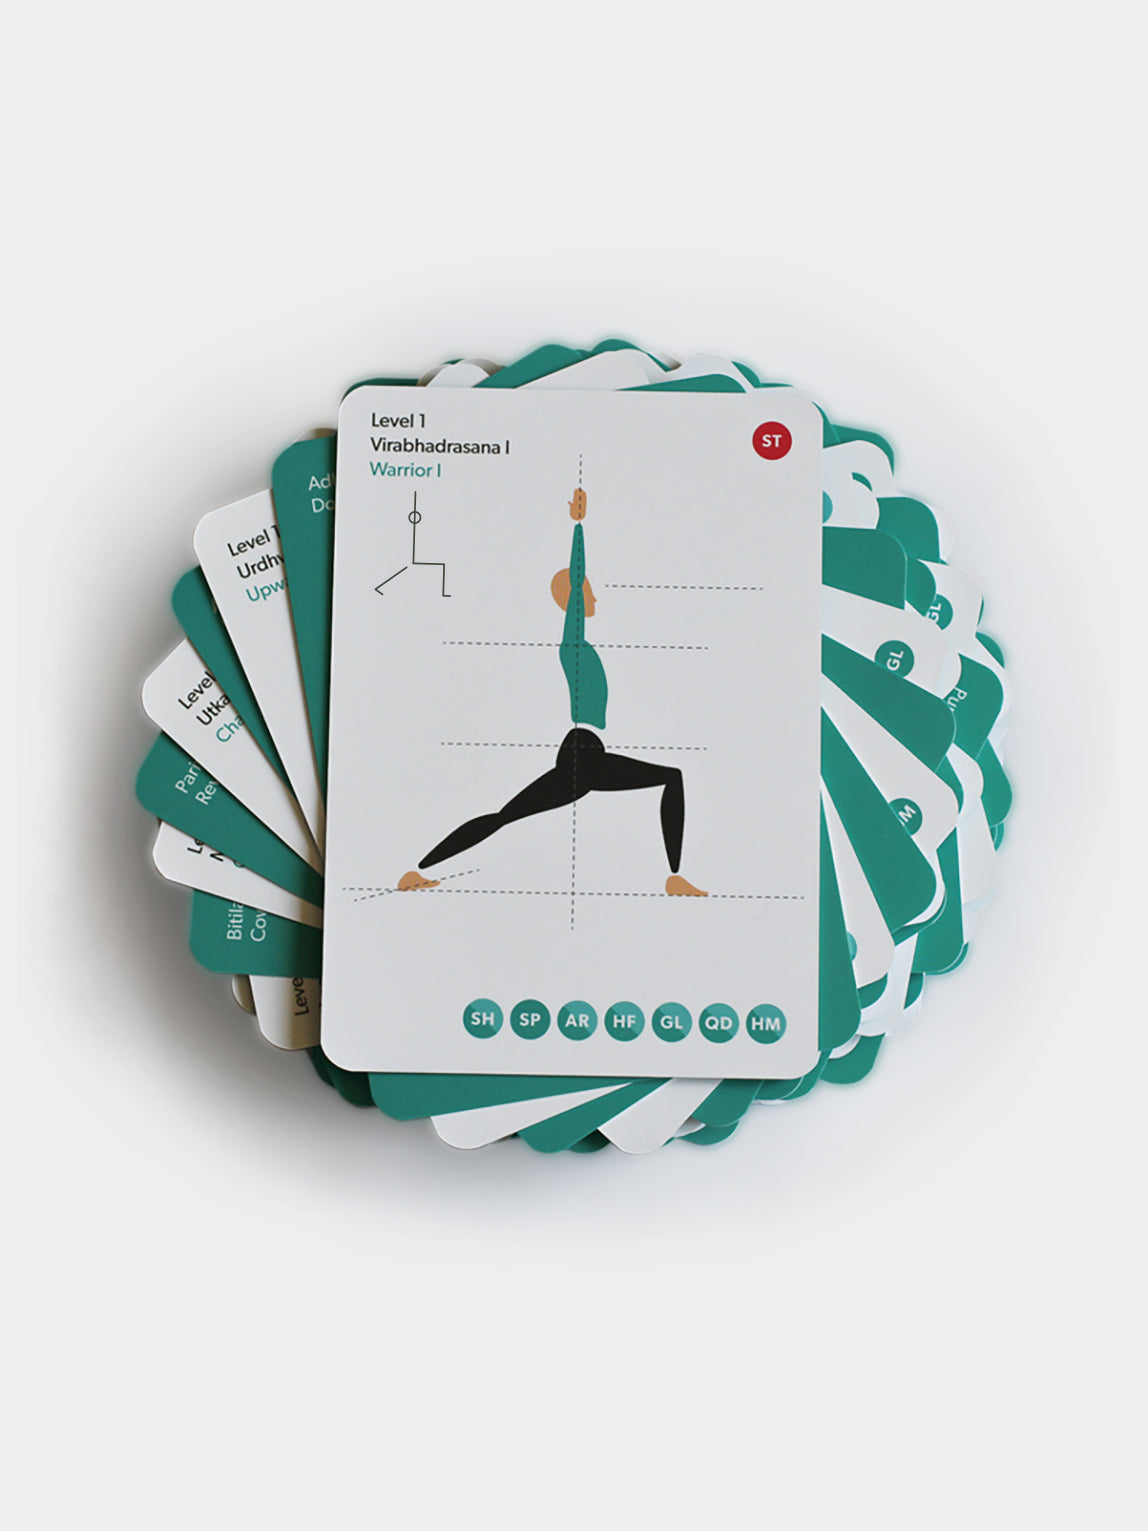 Asana Moon Premium Yoga Cards for Beginners Yoga kit and Workout Set for  Beginners and Teens Yoga Sequence Deck with Alignment cues and Sanskrit  Names Alternative for a Yoga Book